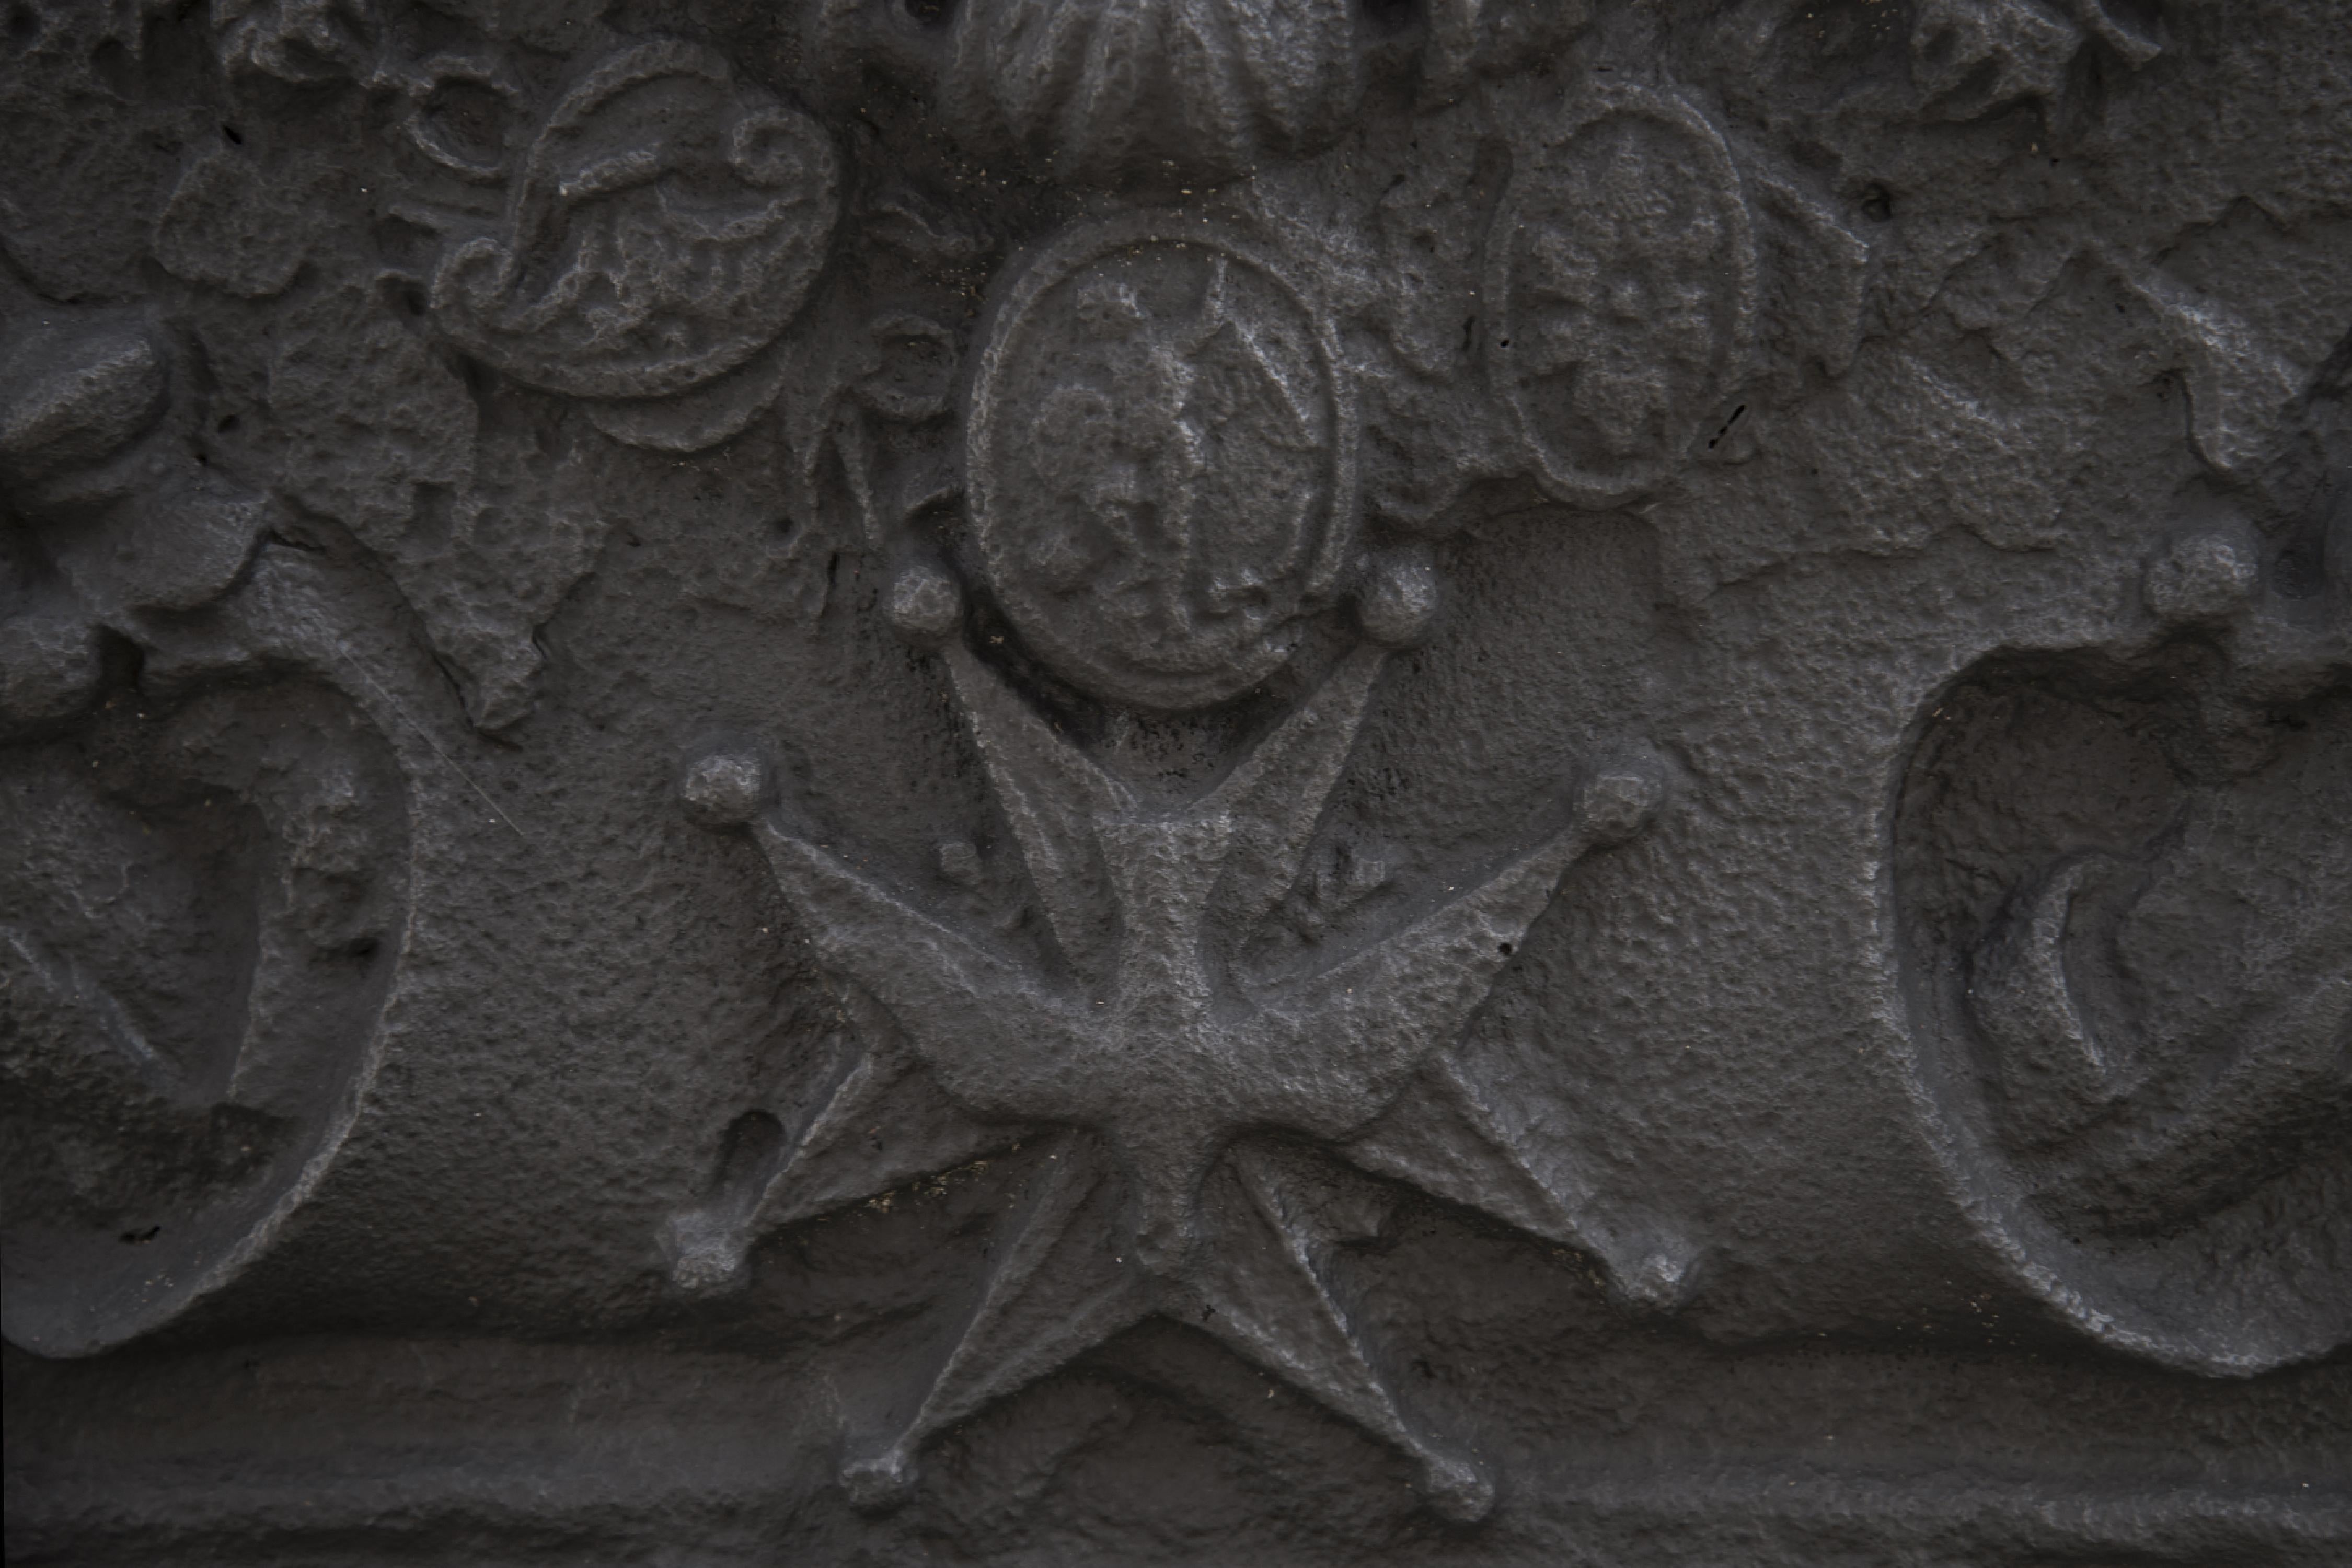 Cast iron fireback with the coat of arms of Colbert, marquis de Seignelay 3